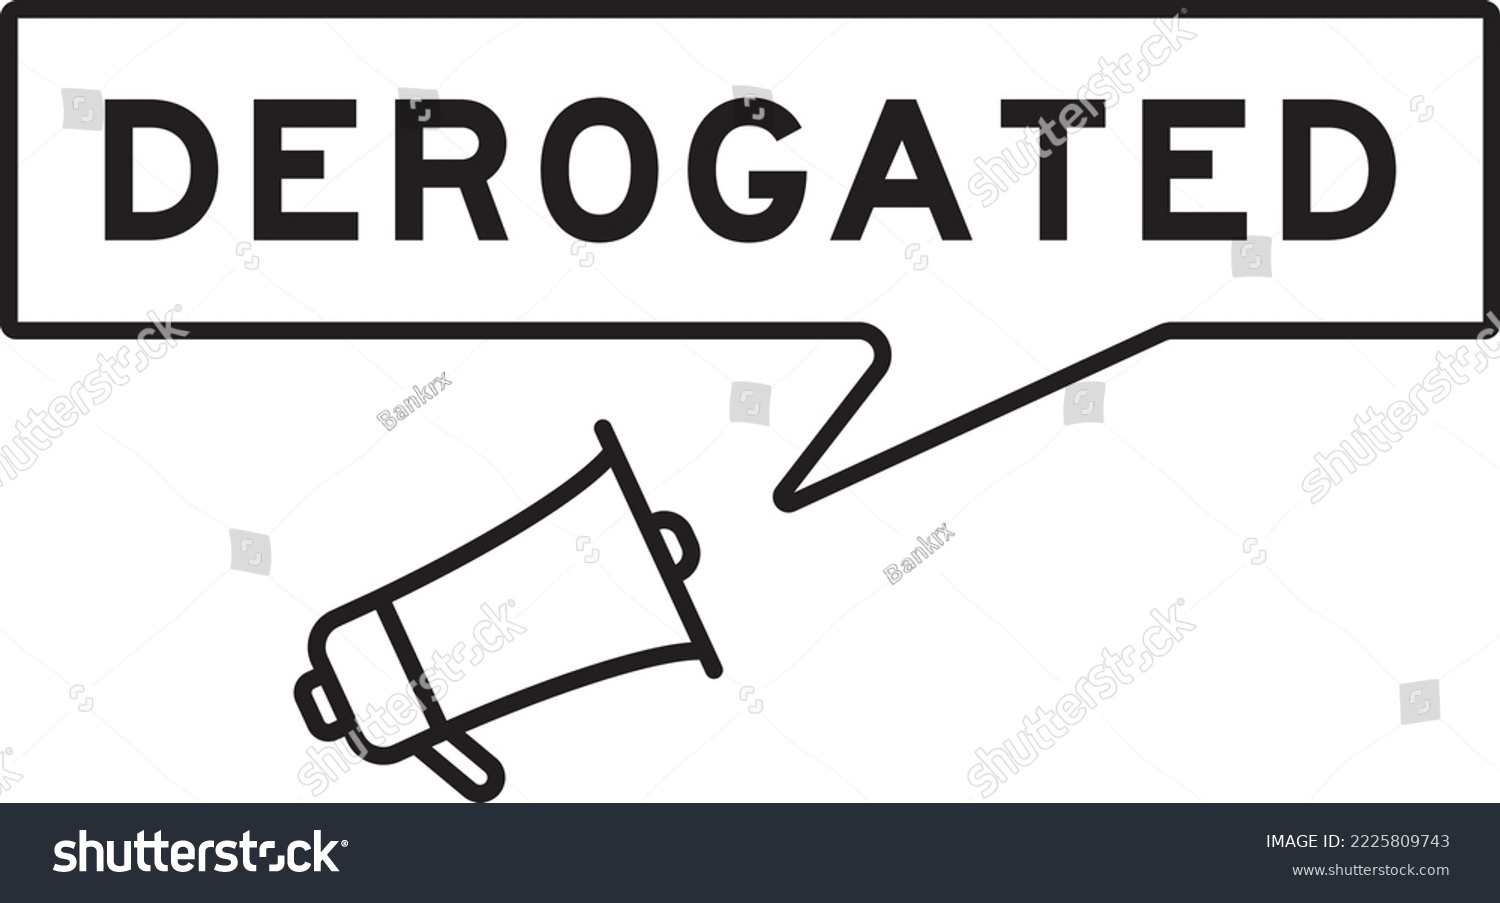 SVG of Megaphone icon with speech bubble in word derogated on white background svg